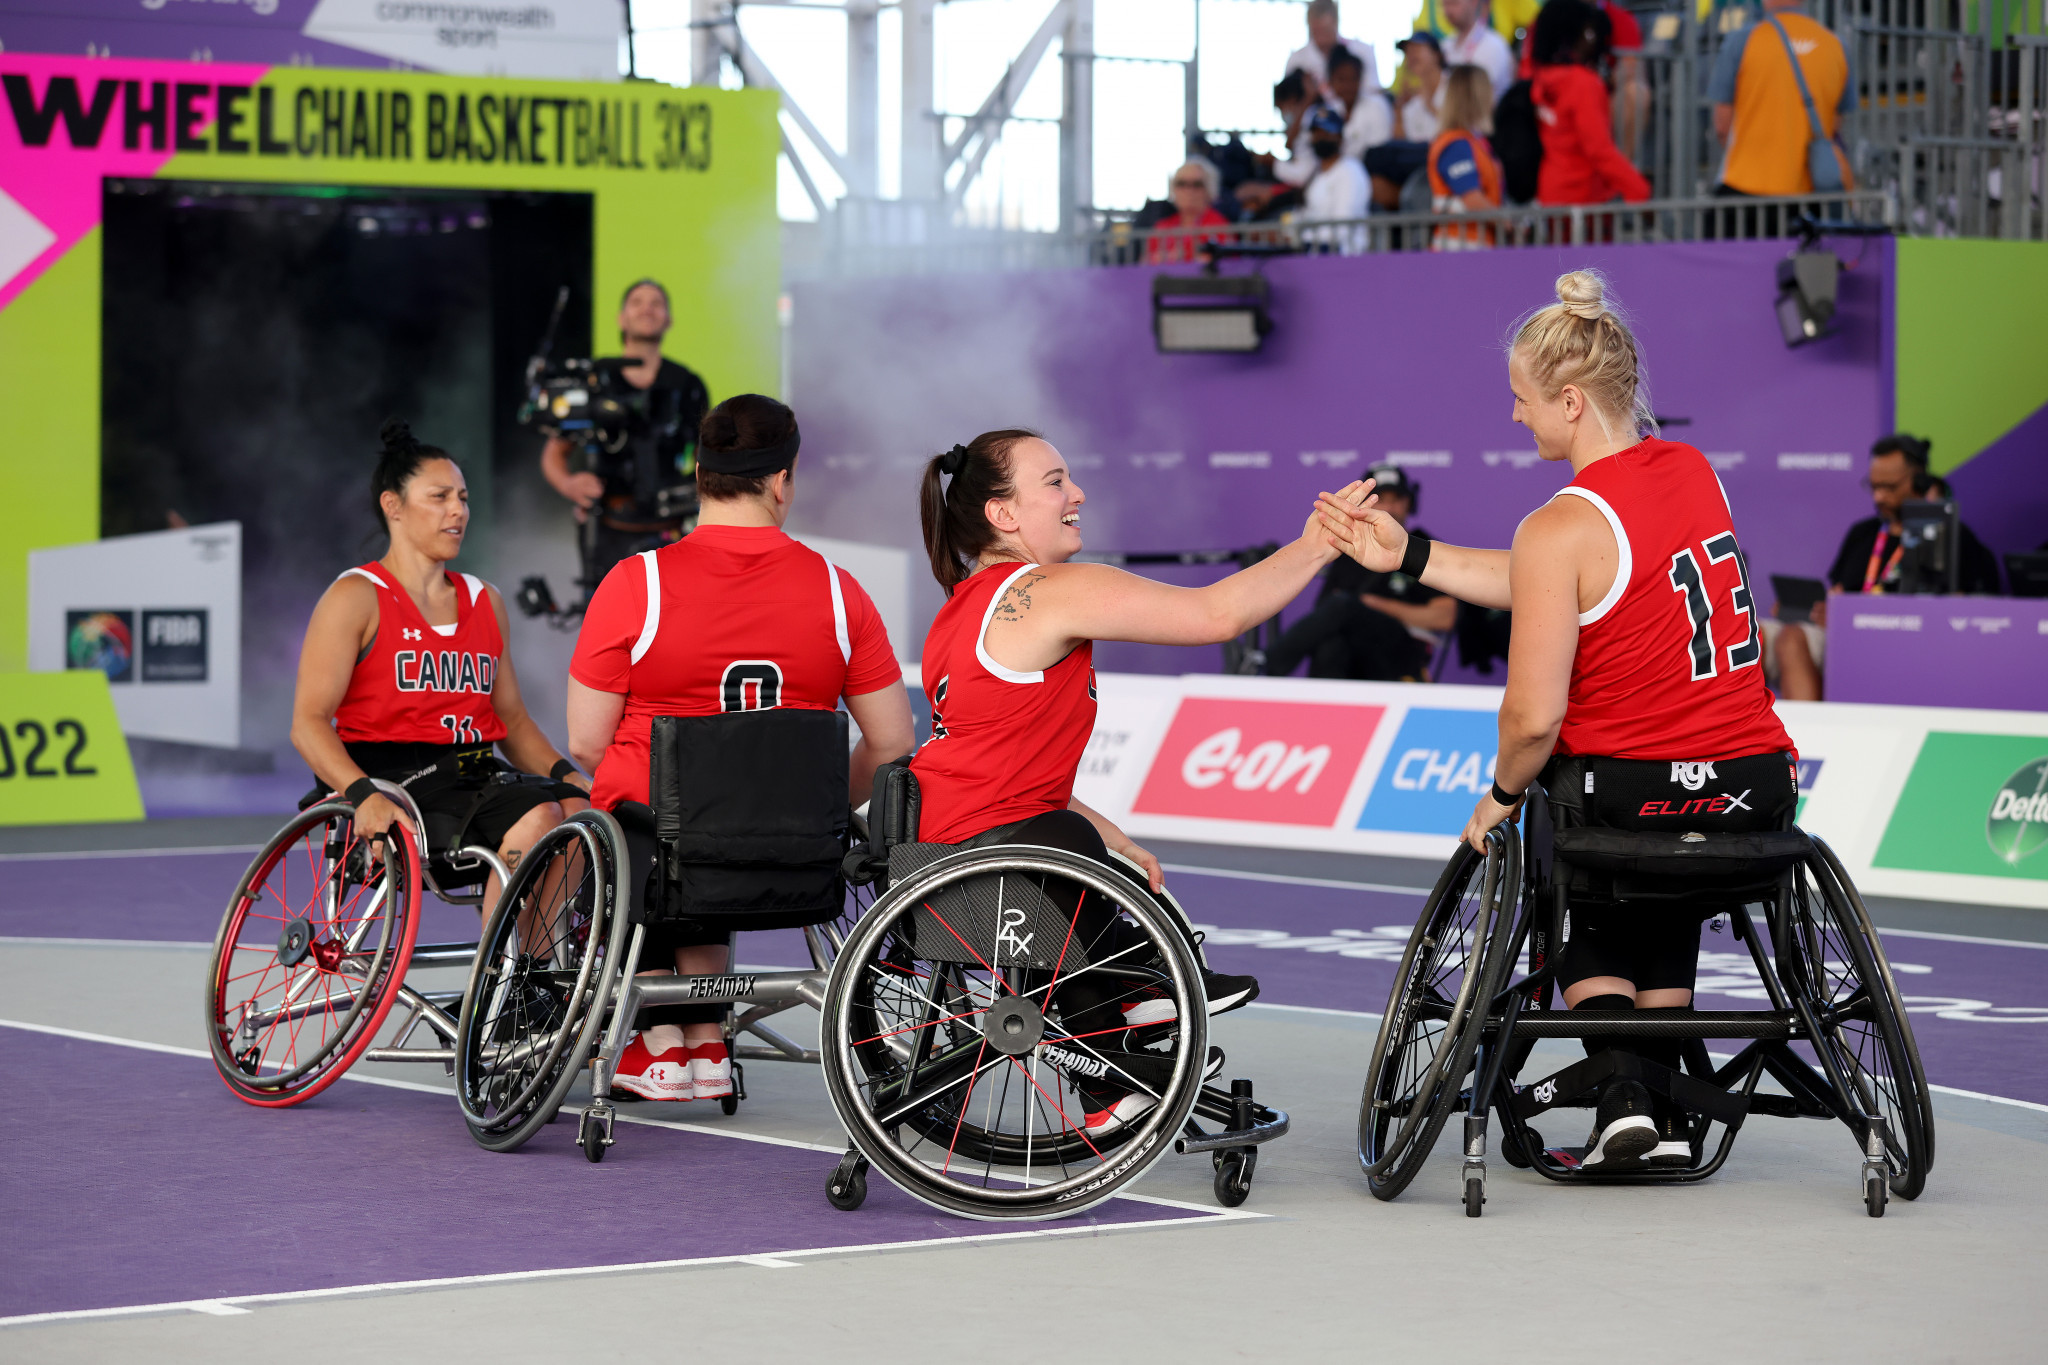 Canada won gold in the women's 3x3 wheelchair basketball at Birmingham 2022 ©Getty Images